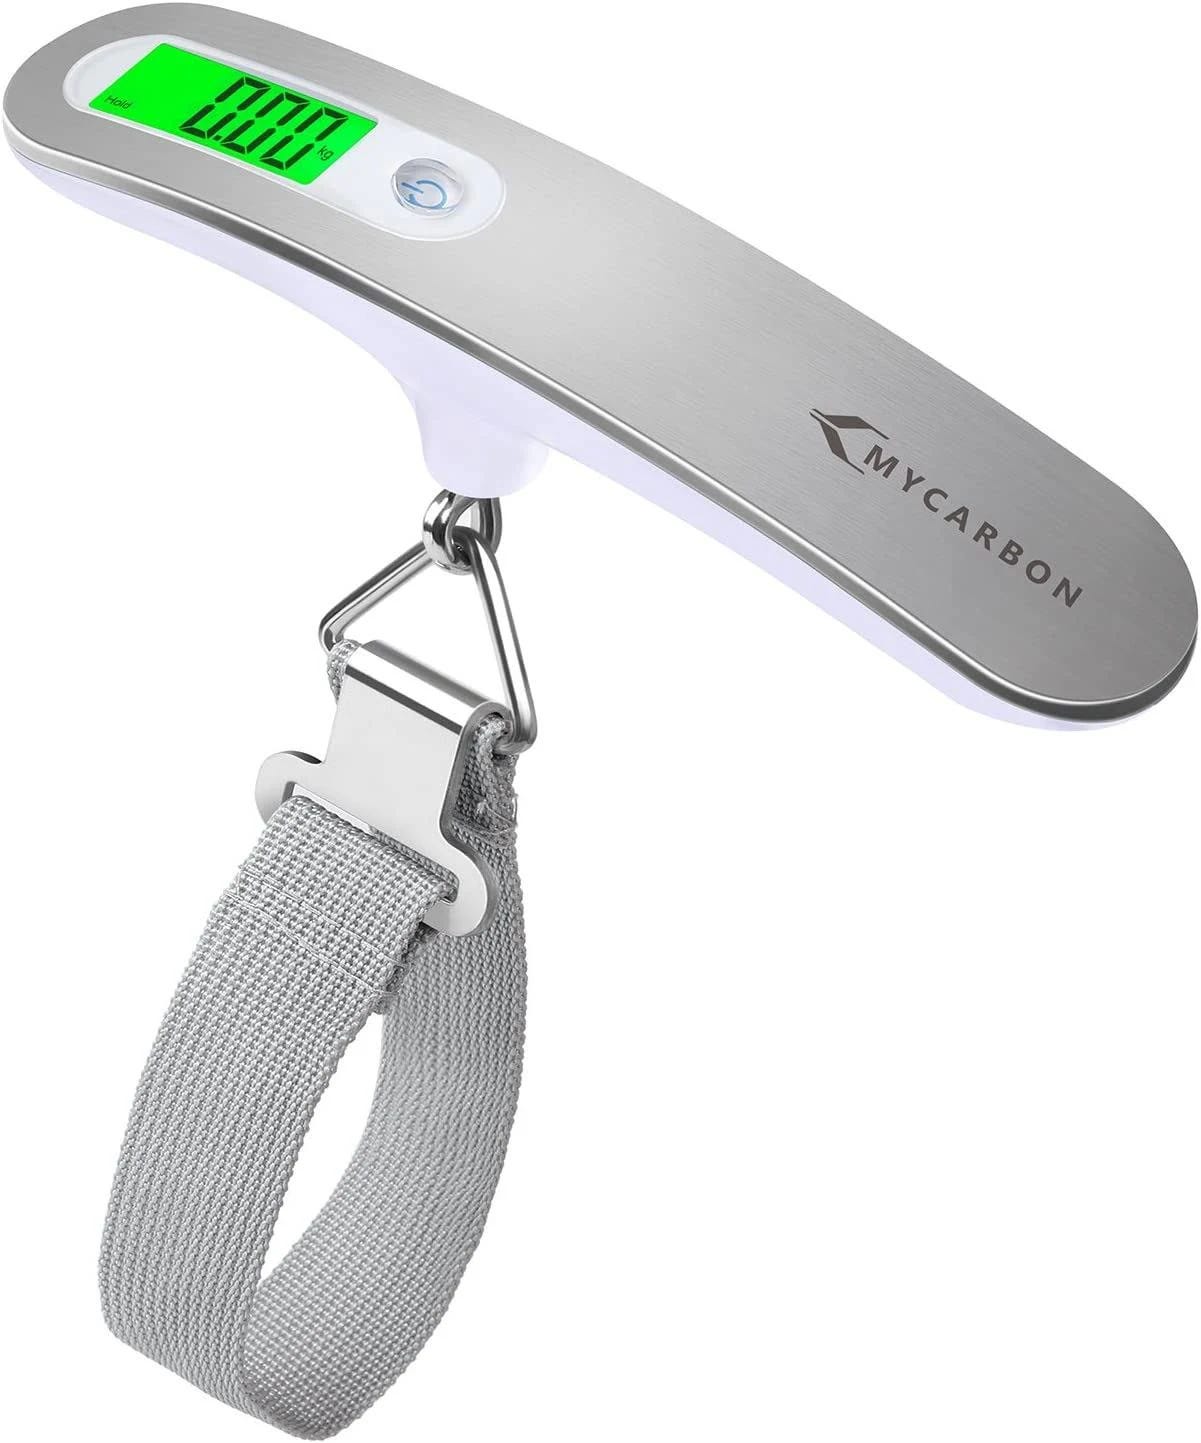 MYCARBON Luggage Scale - Portable Digital Scale for Suitcase Weighing | Image